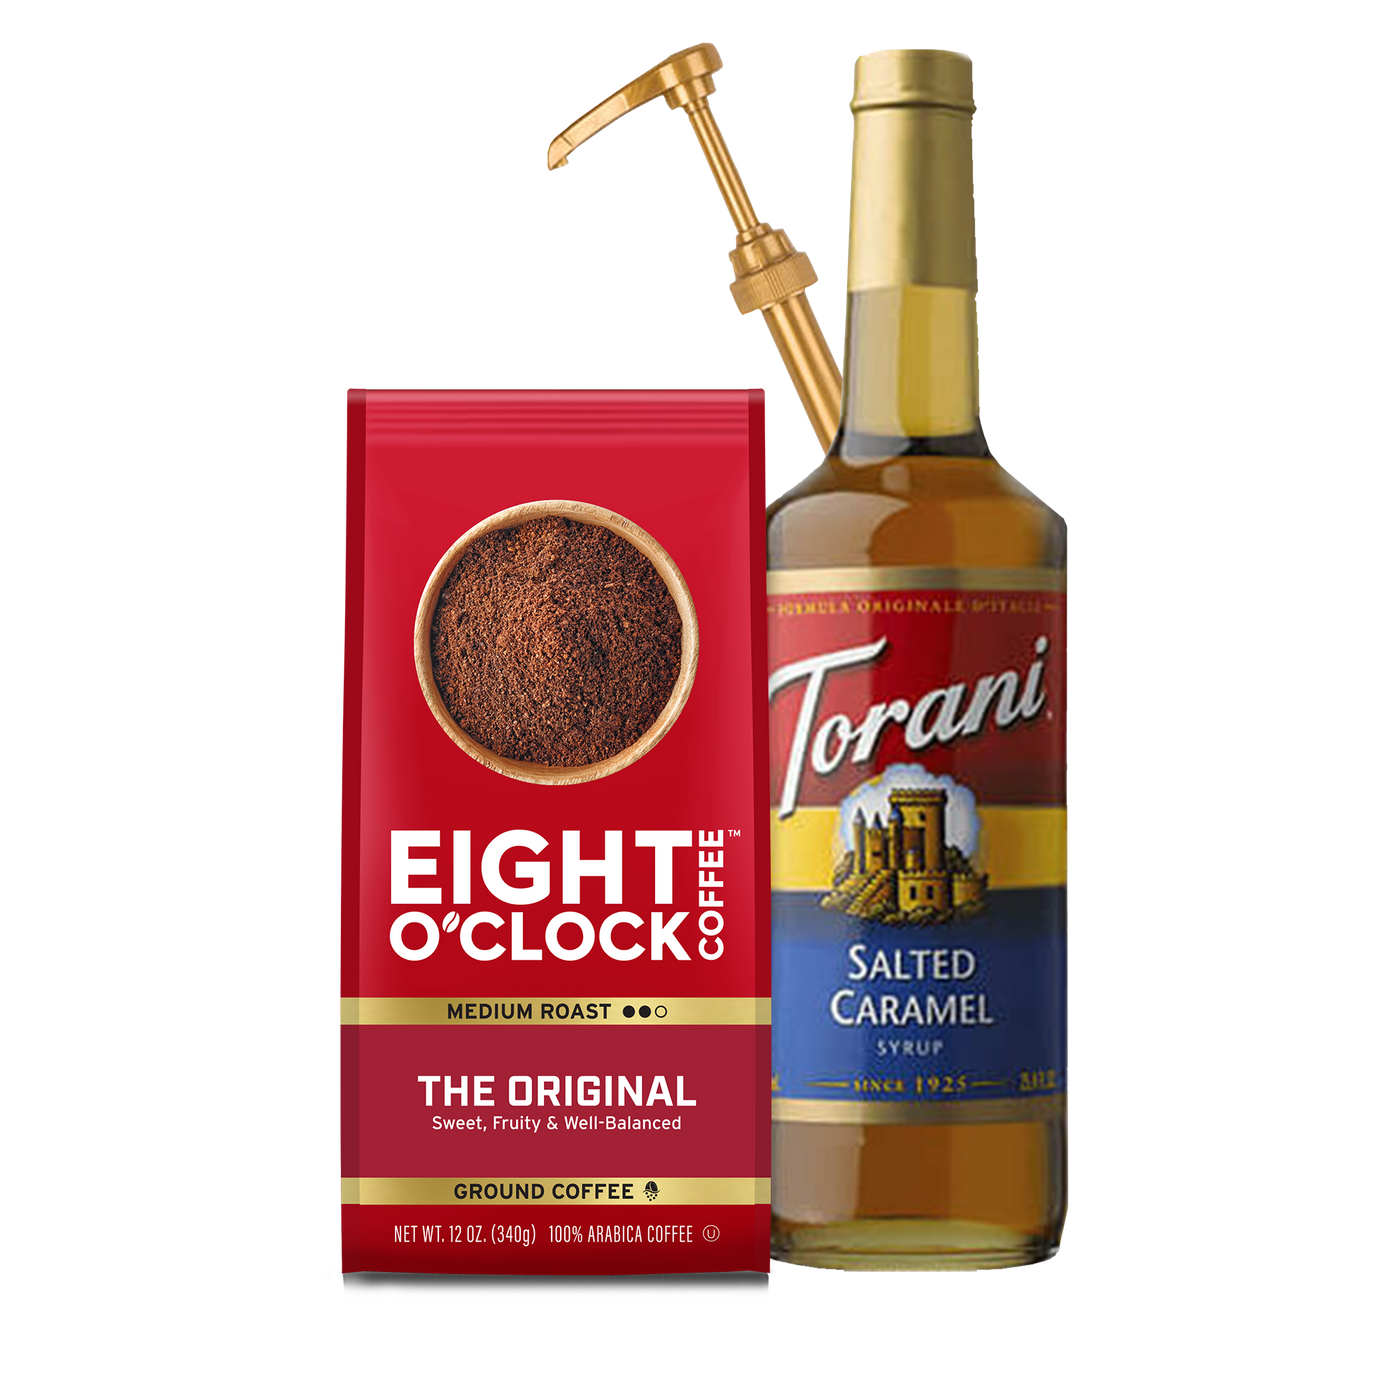 Salted Caramel Latte Gift Set - Eight Oclock Coffee and Torani Salted Caramel Syrup